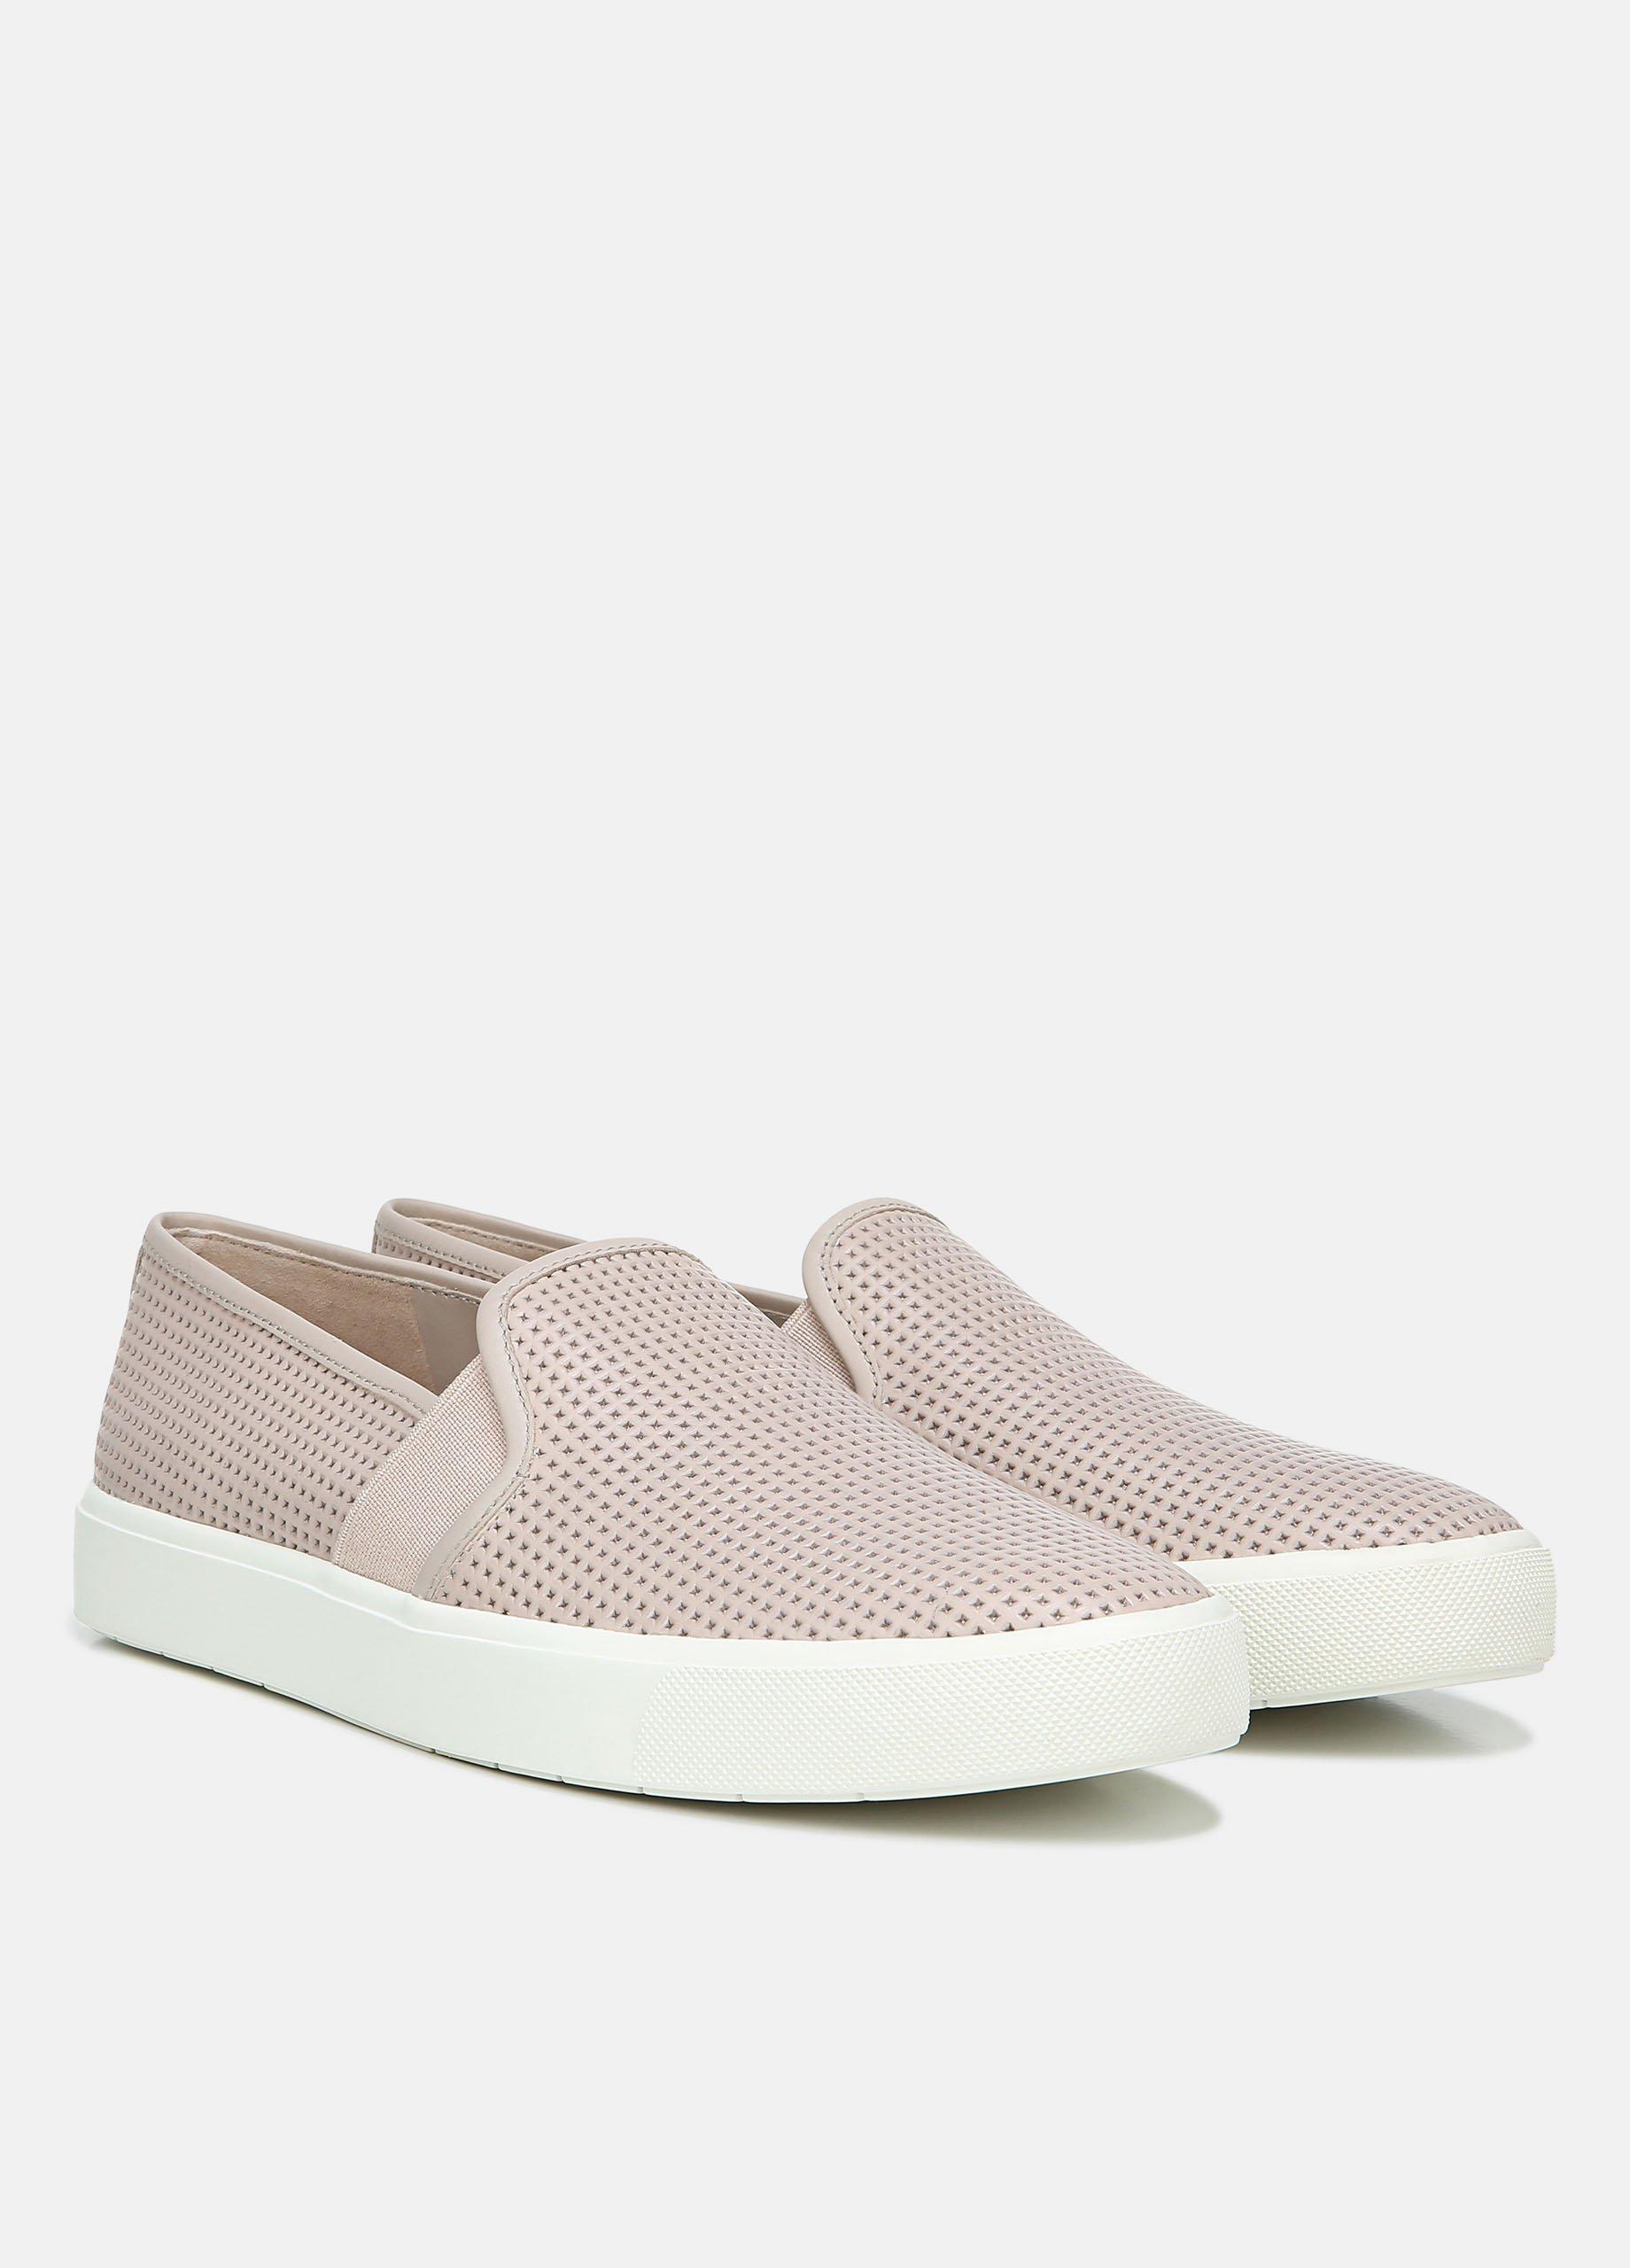 Perforated Leather Blair Sneaker for Women | Vince